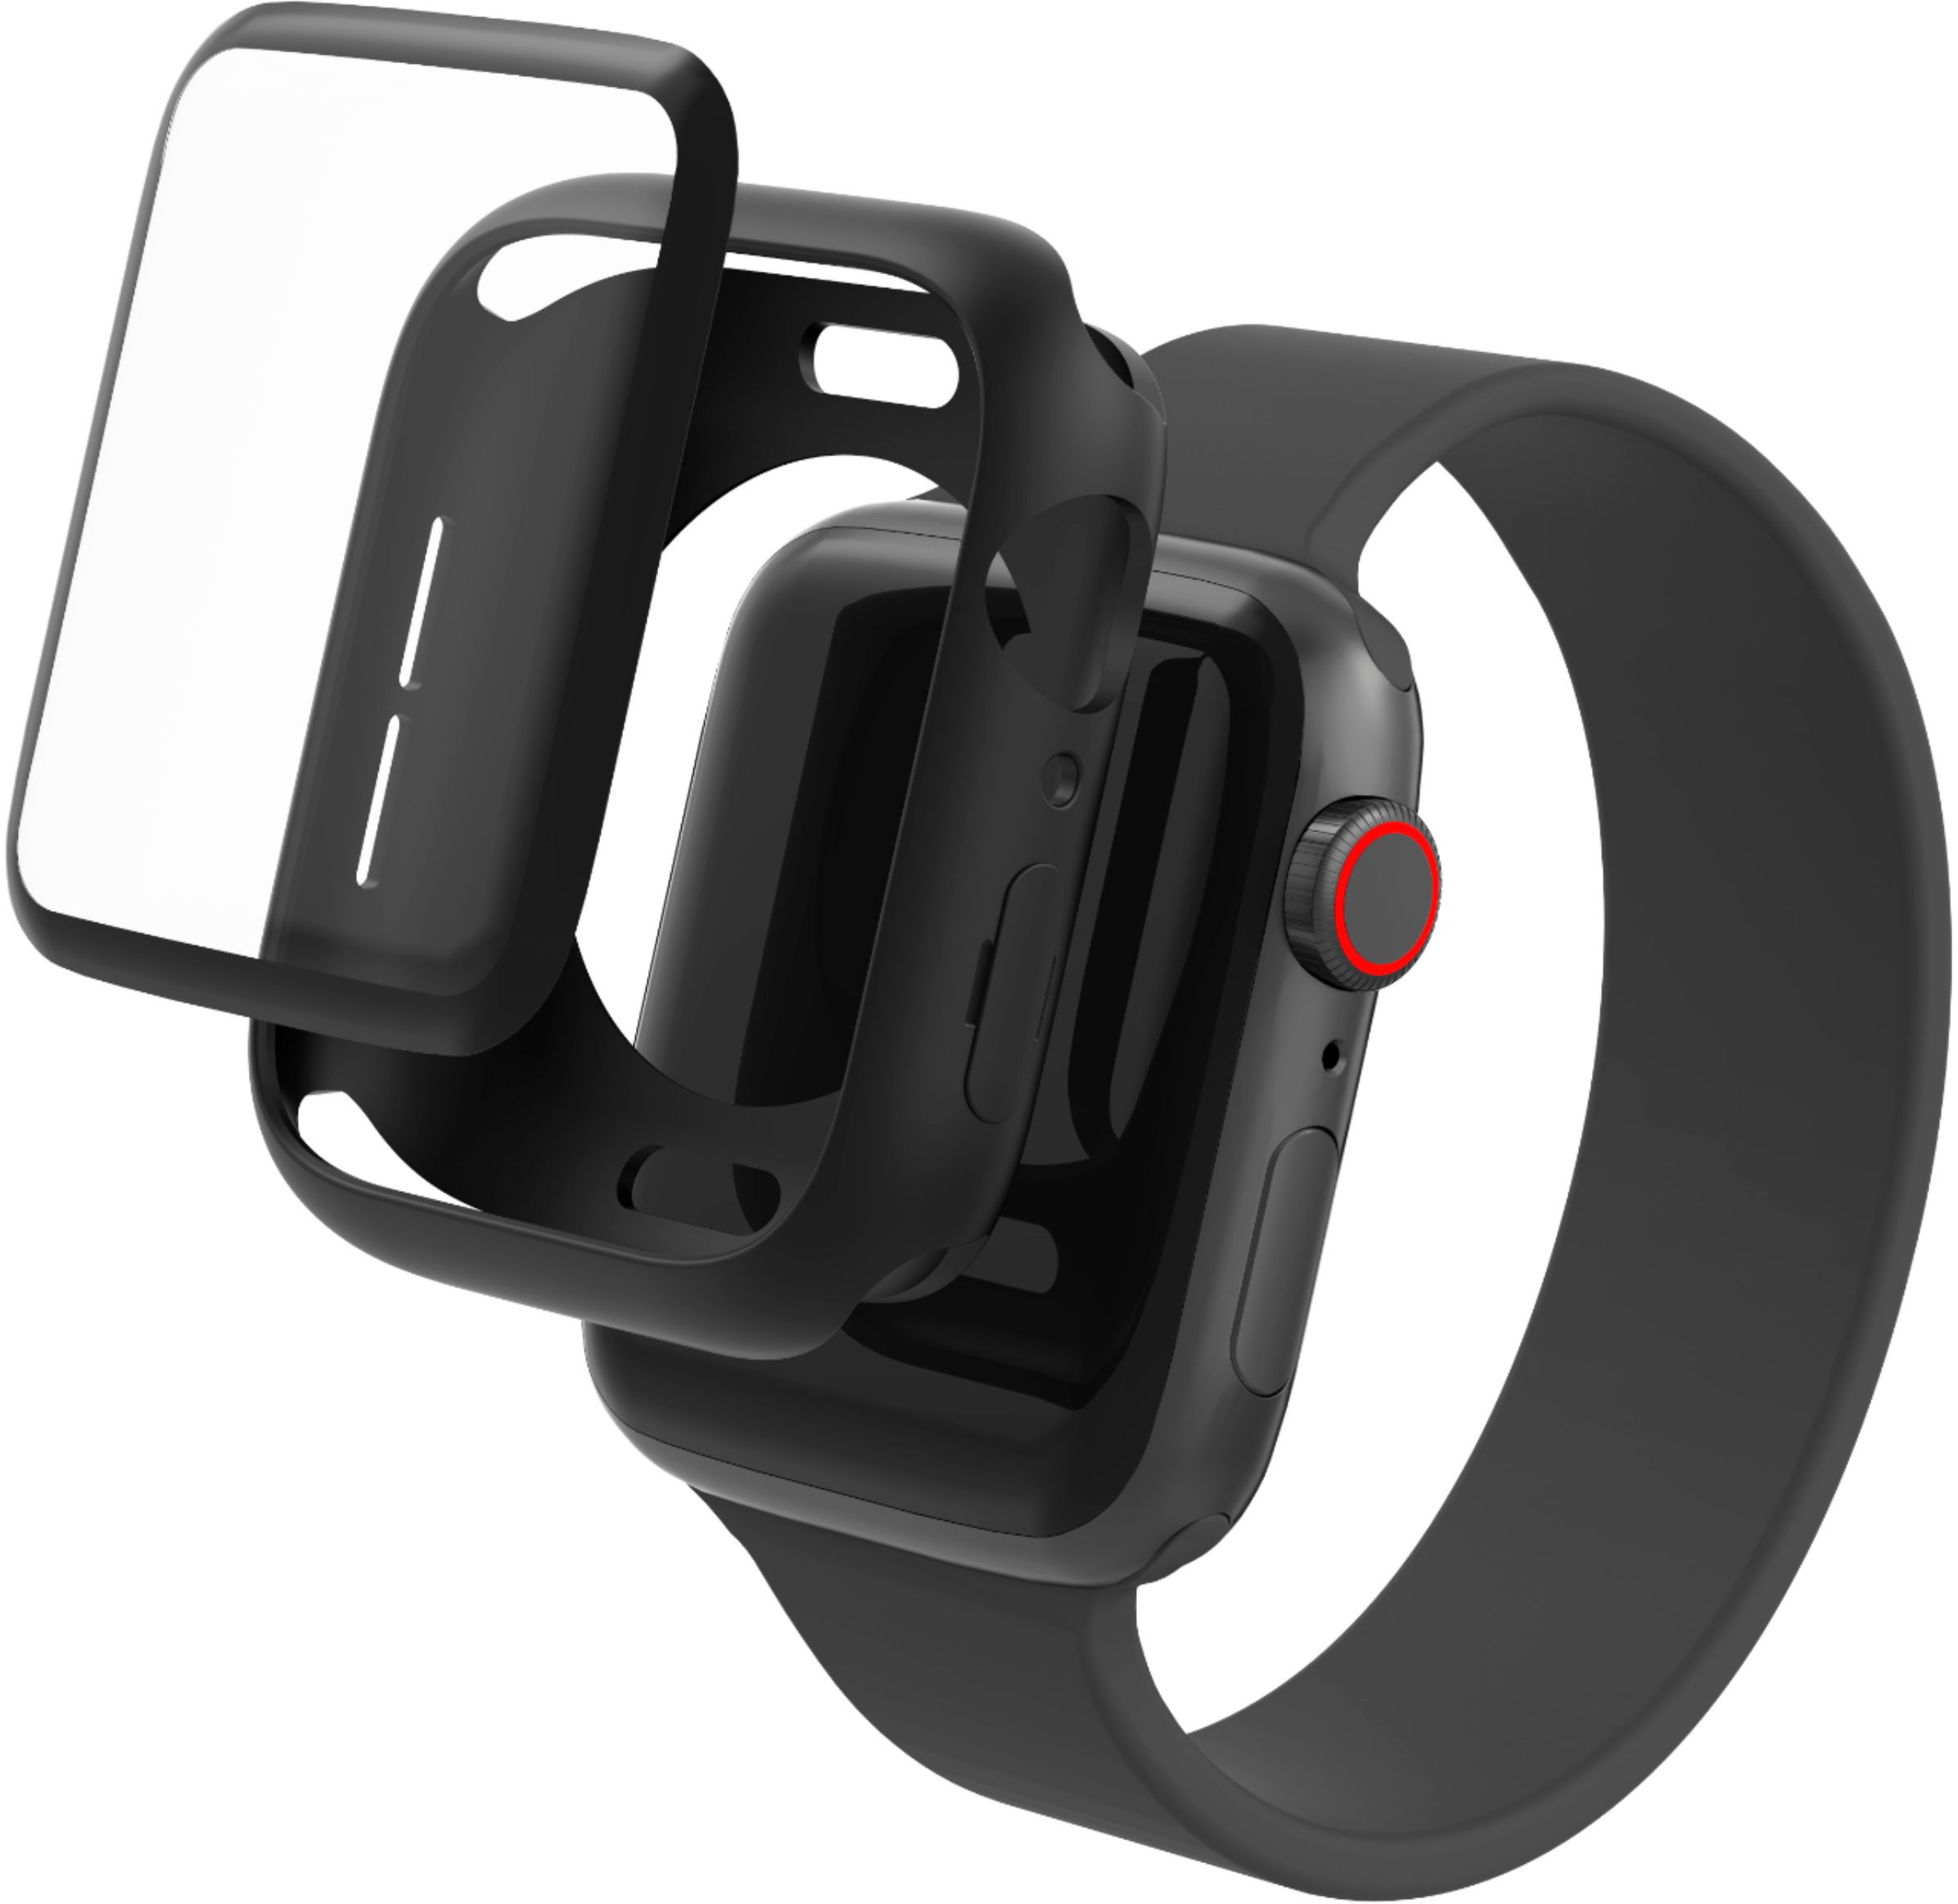 Angle View: ZAGG - InvisibleShield GlassFusion+ 360 Flexible Hybrid Screen Protector + Bumper for Apple Watch Series 4/5/SE/6 40mm - Black